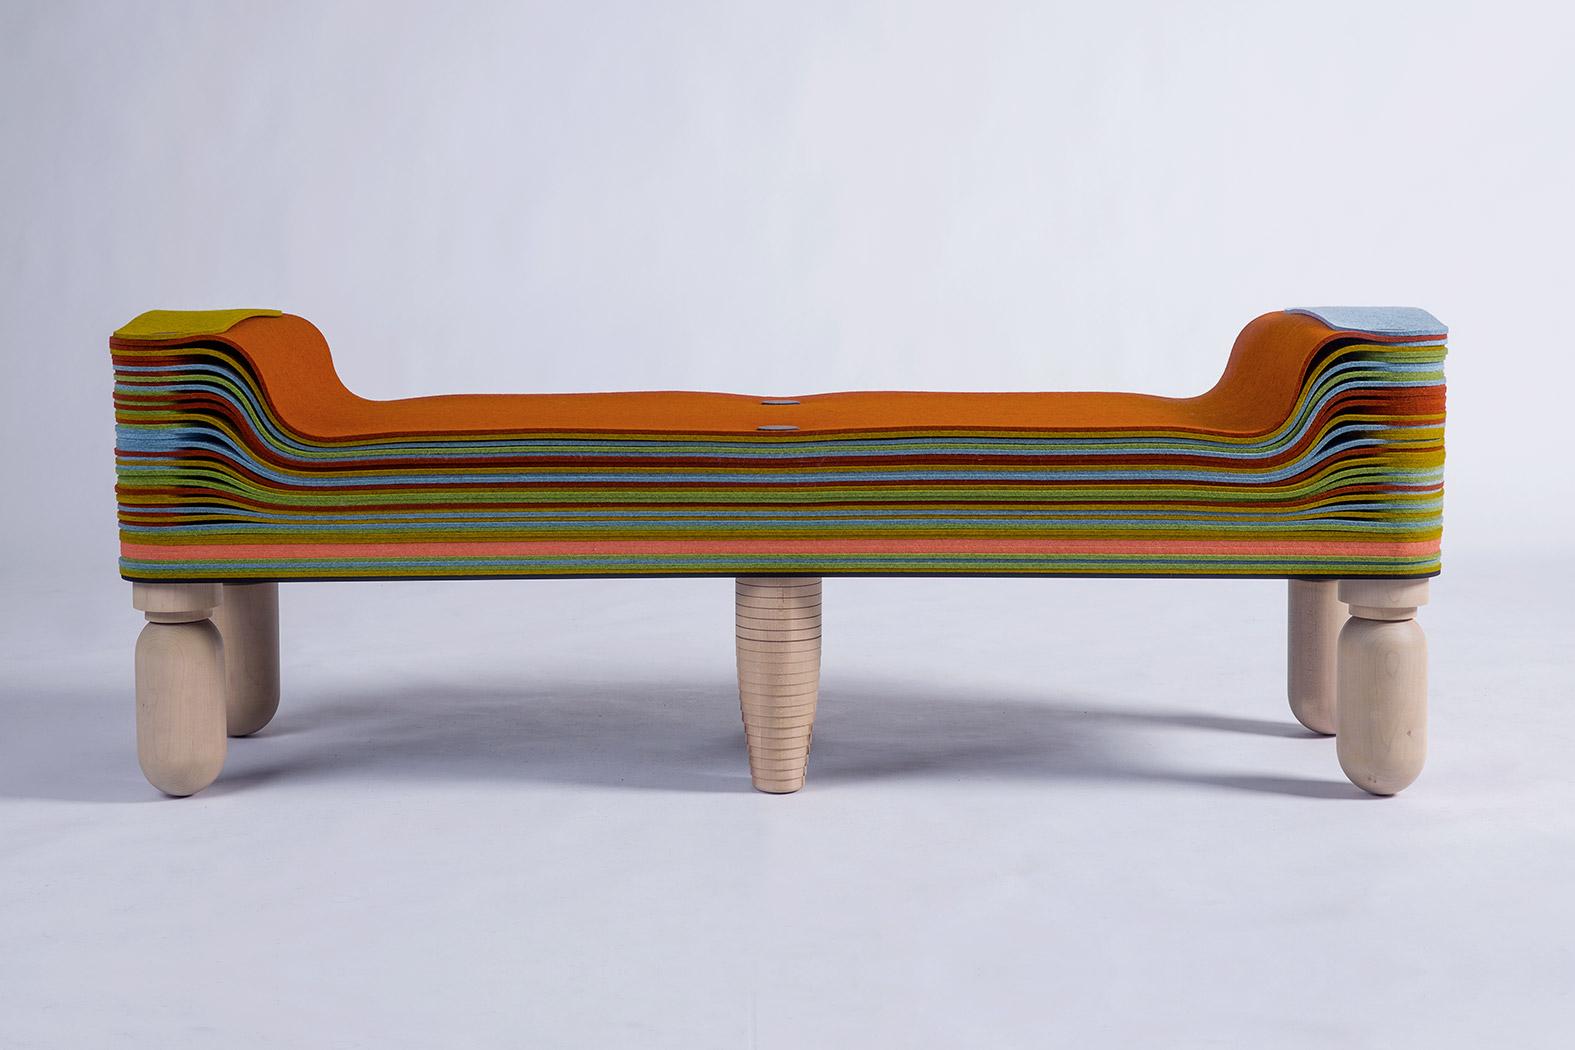 Contemporary Maxine, Felt and Wood Bench, Benoist F. Drut in Stackabl, Canada, 2021 For Sale